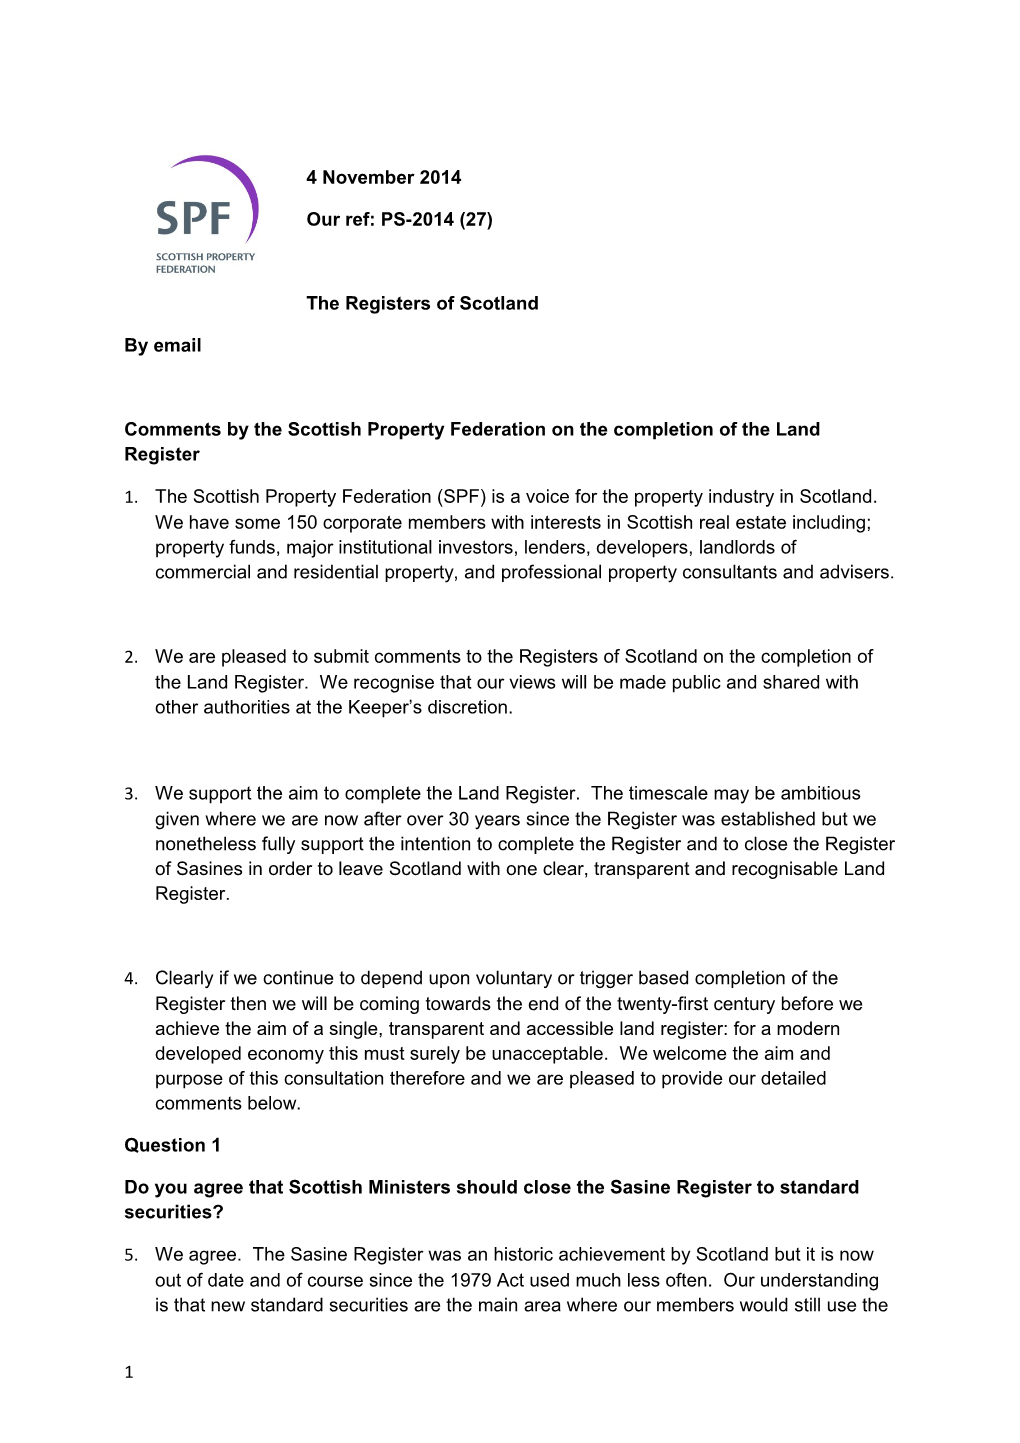 Comments by the Scottish Property Federation on the Completion of the Land Register